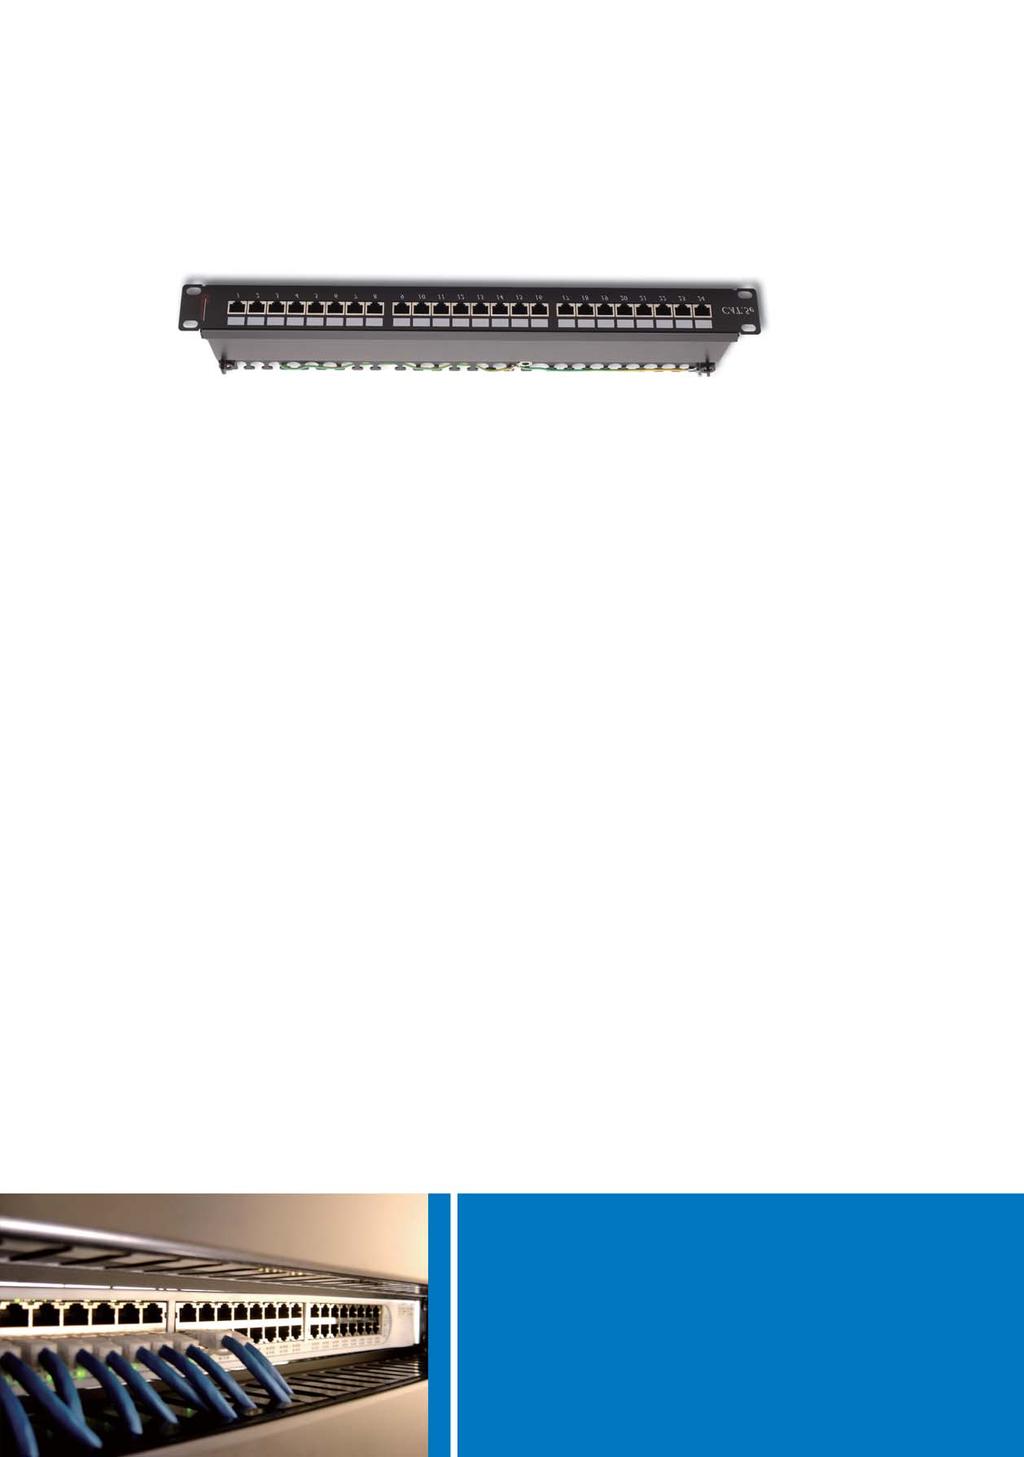 Patch Panel Category 5e Shielded Patch Panel Premium Line Category 5e shielded Patch panel comply with ANSI/TIA-568-C.2, ISO/IEC 11801 and EN 50173-1 Class D specifications.